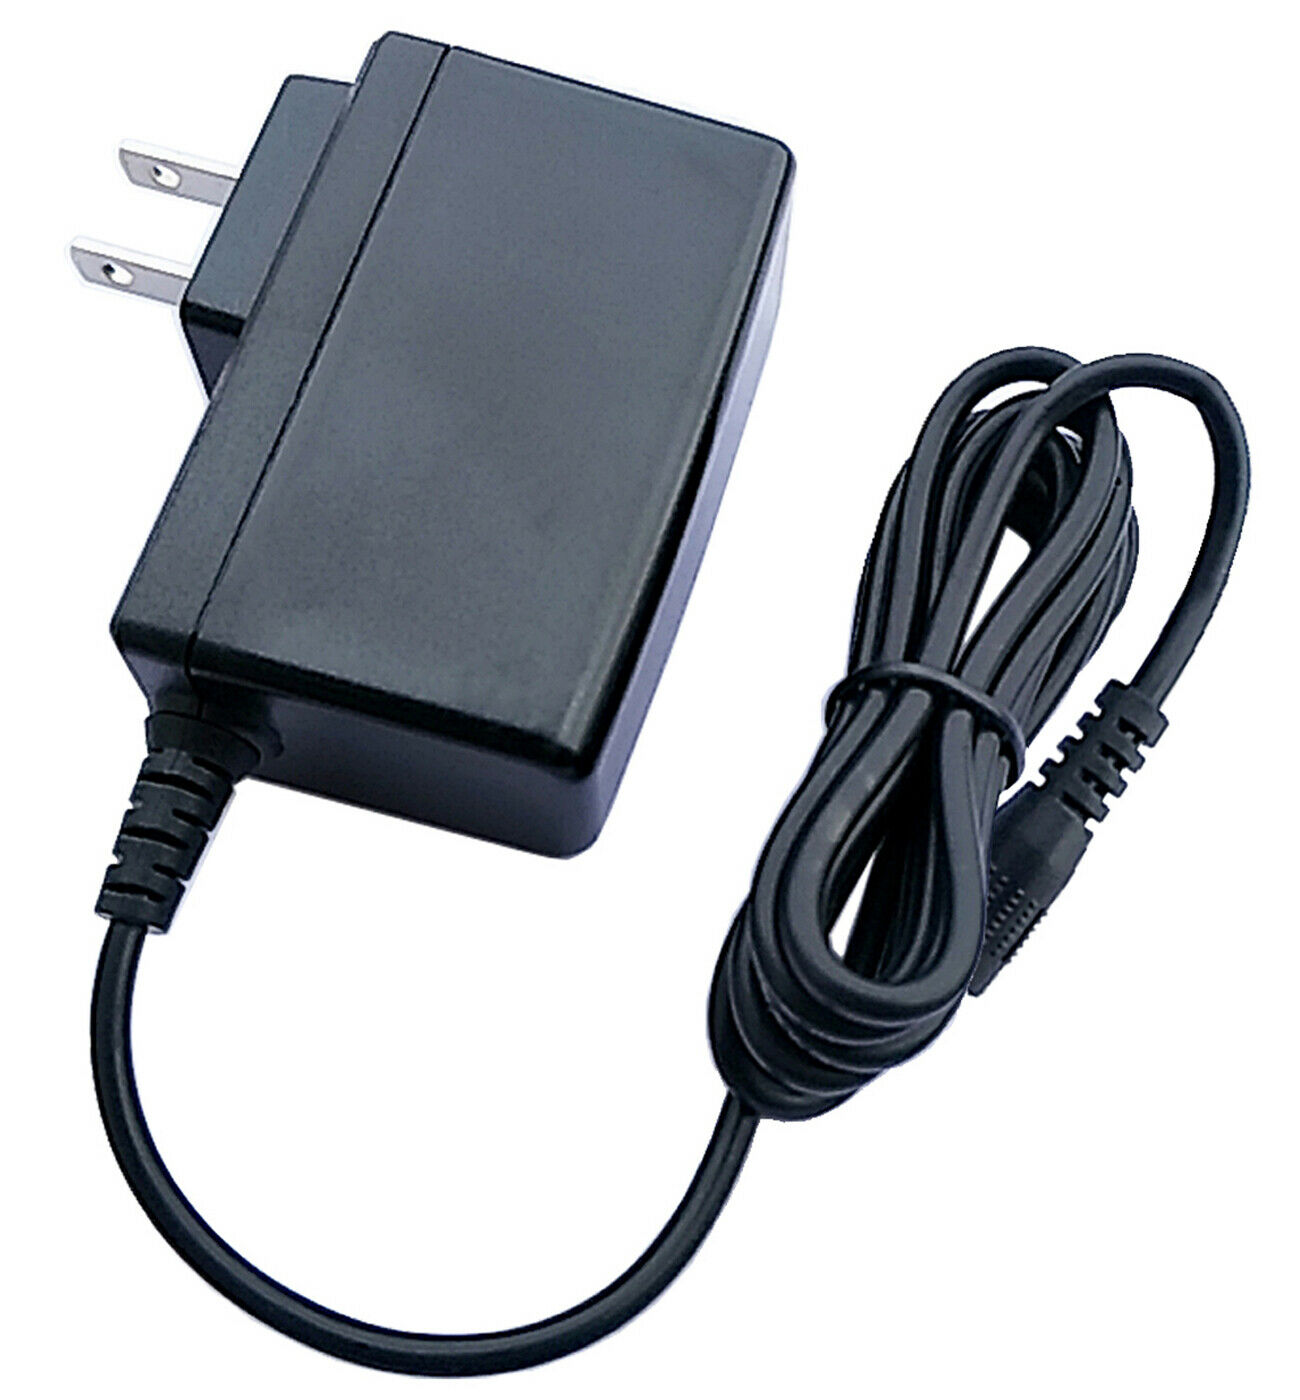 5V AC DC Adapter For Graco Simple Sway Baby Swing Glider LX Elite Power Charger Technical Specifications: 1 AC input vo